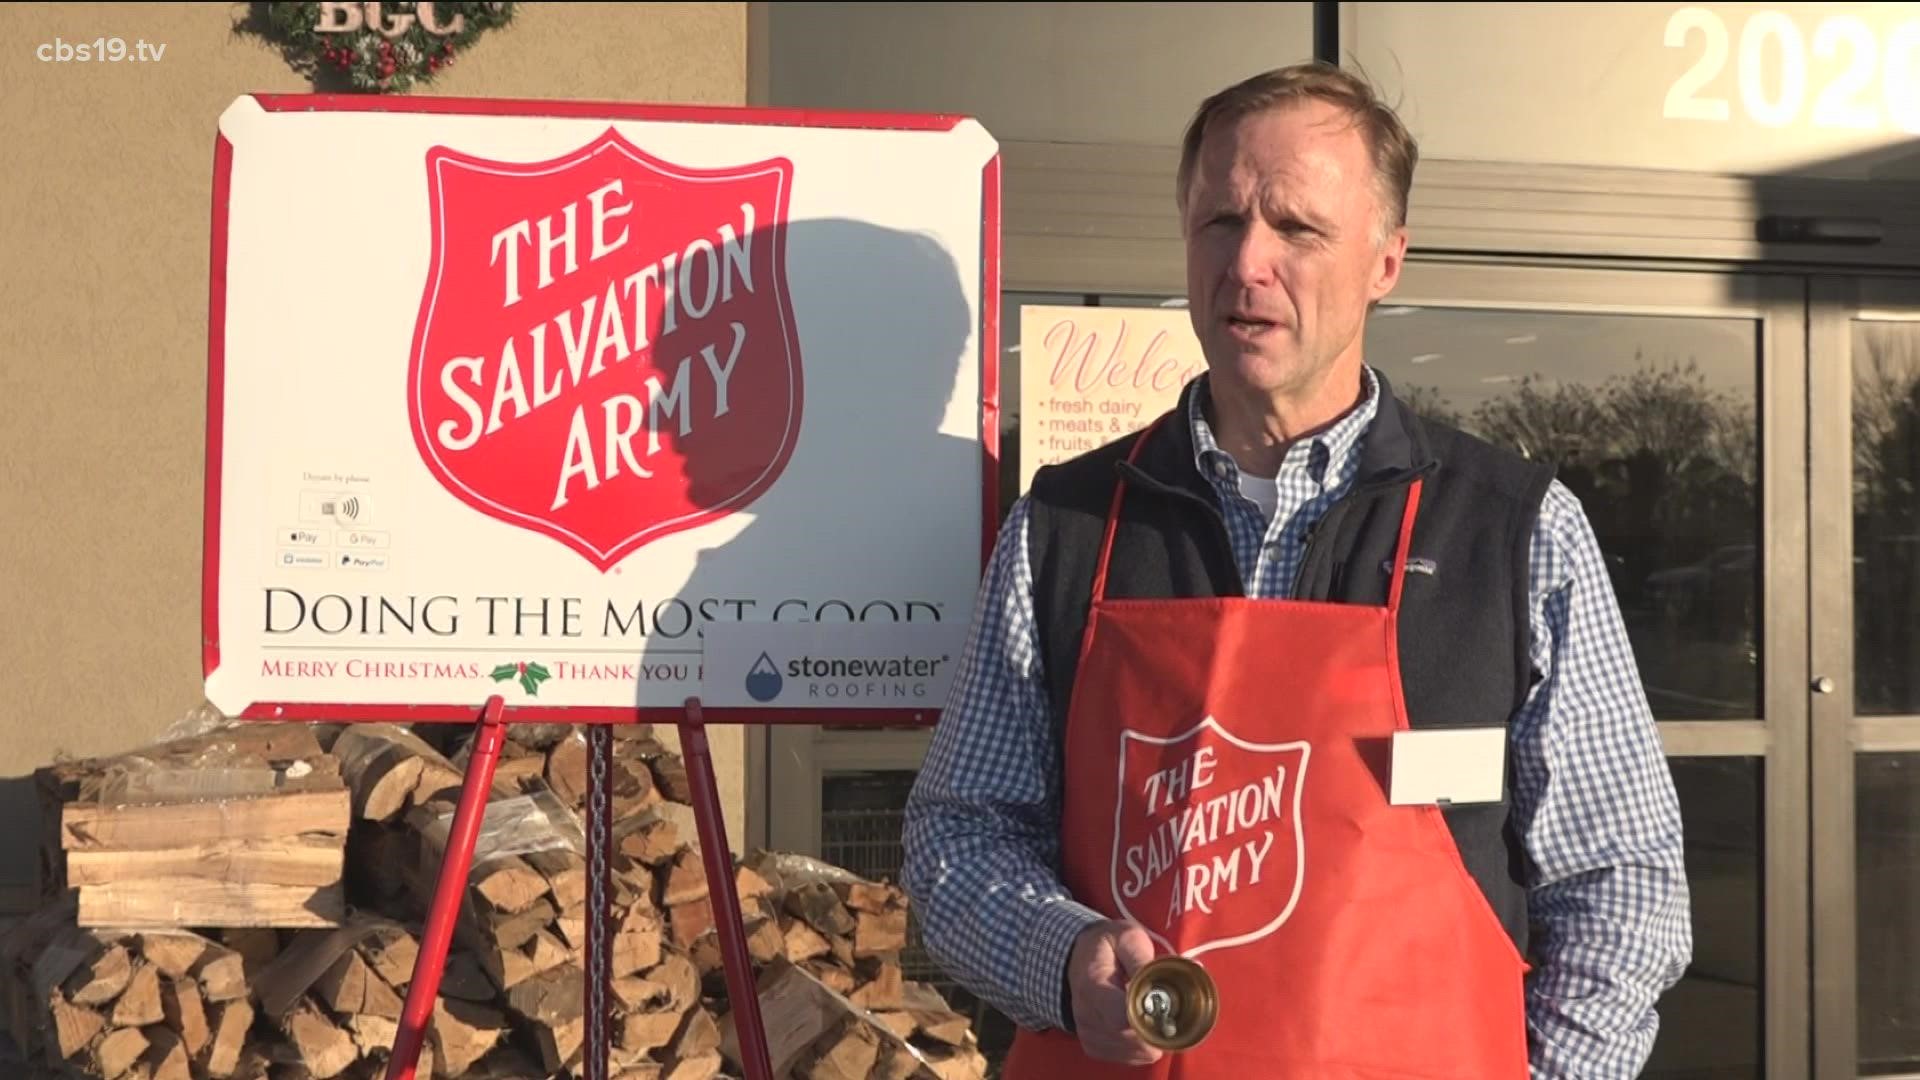 With only days left in the volunteer season, the nonprofit has only reached 20% of their goal for bell ringers.